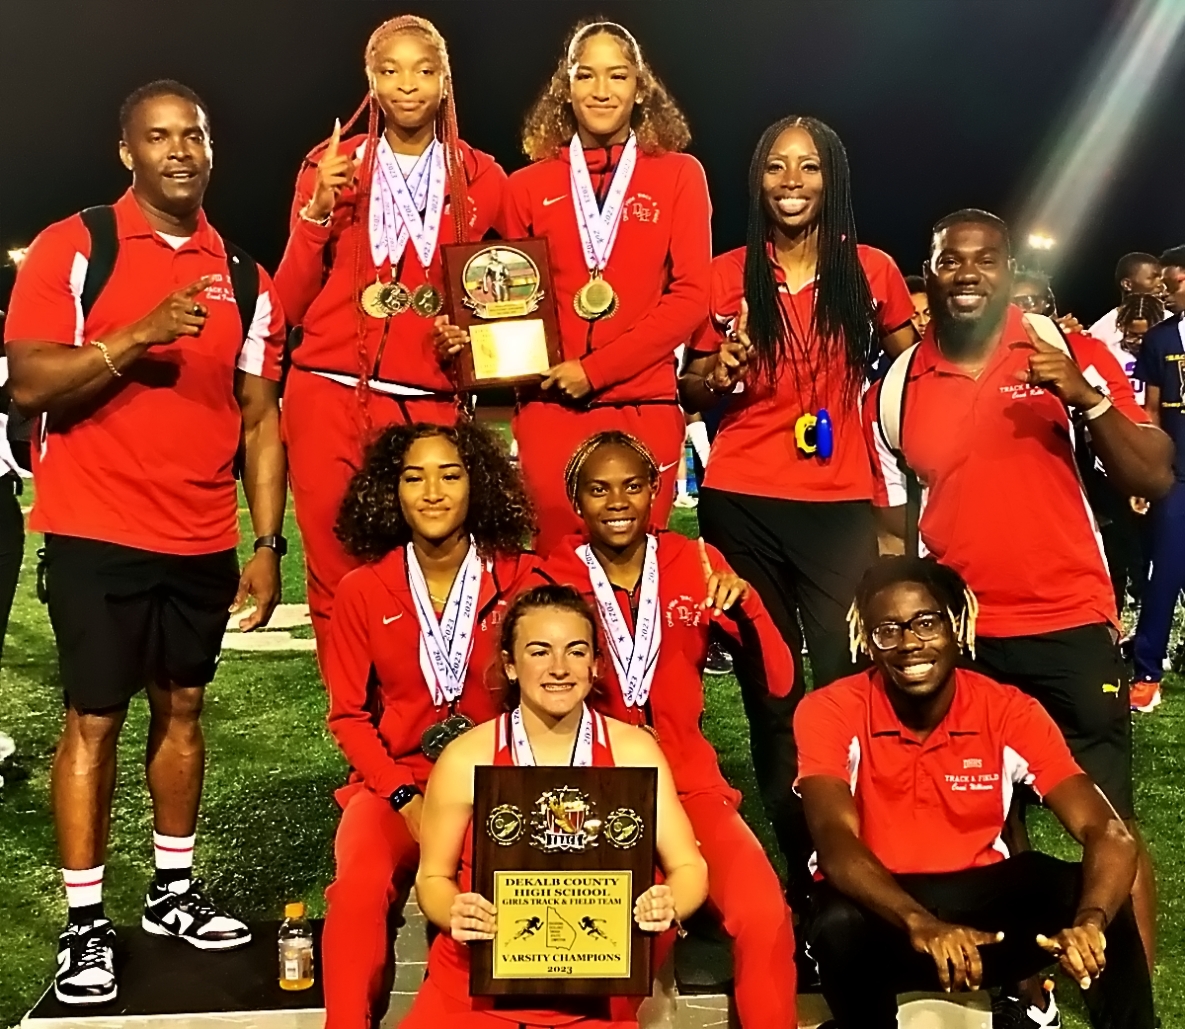 The Druid Hills Lady Red Devils captured their first Napoleon Cobb DCSD Track and Field Championships title in thrilling fashion by winning the final event to take the win.